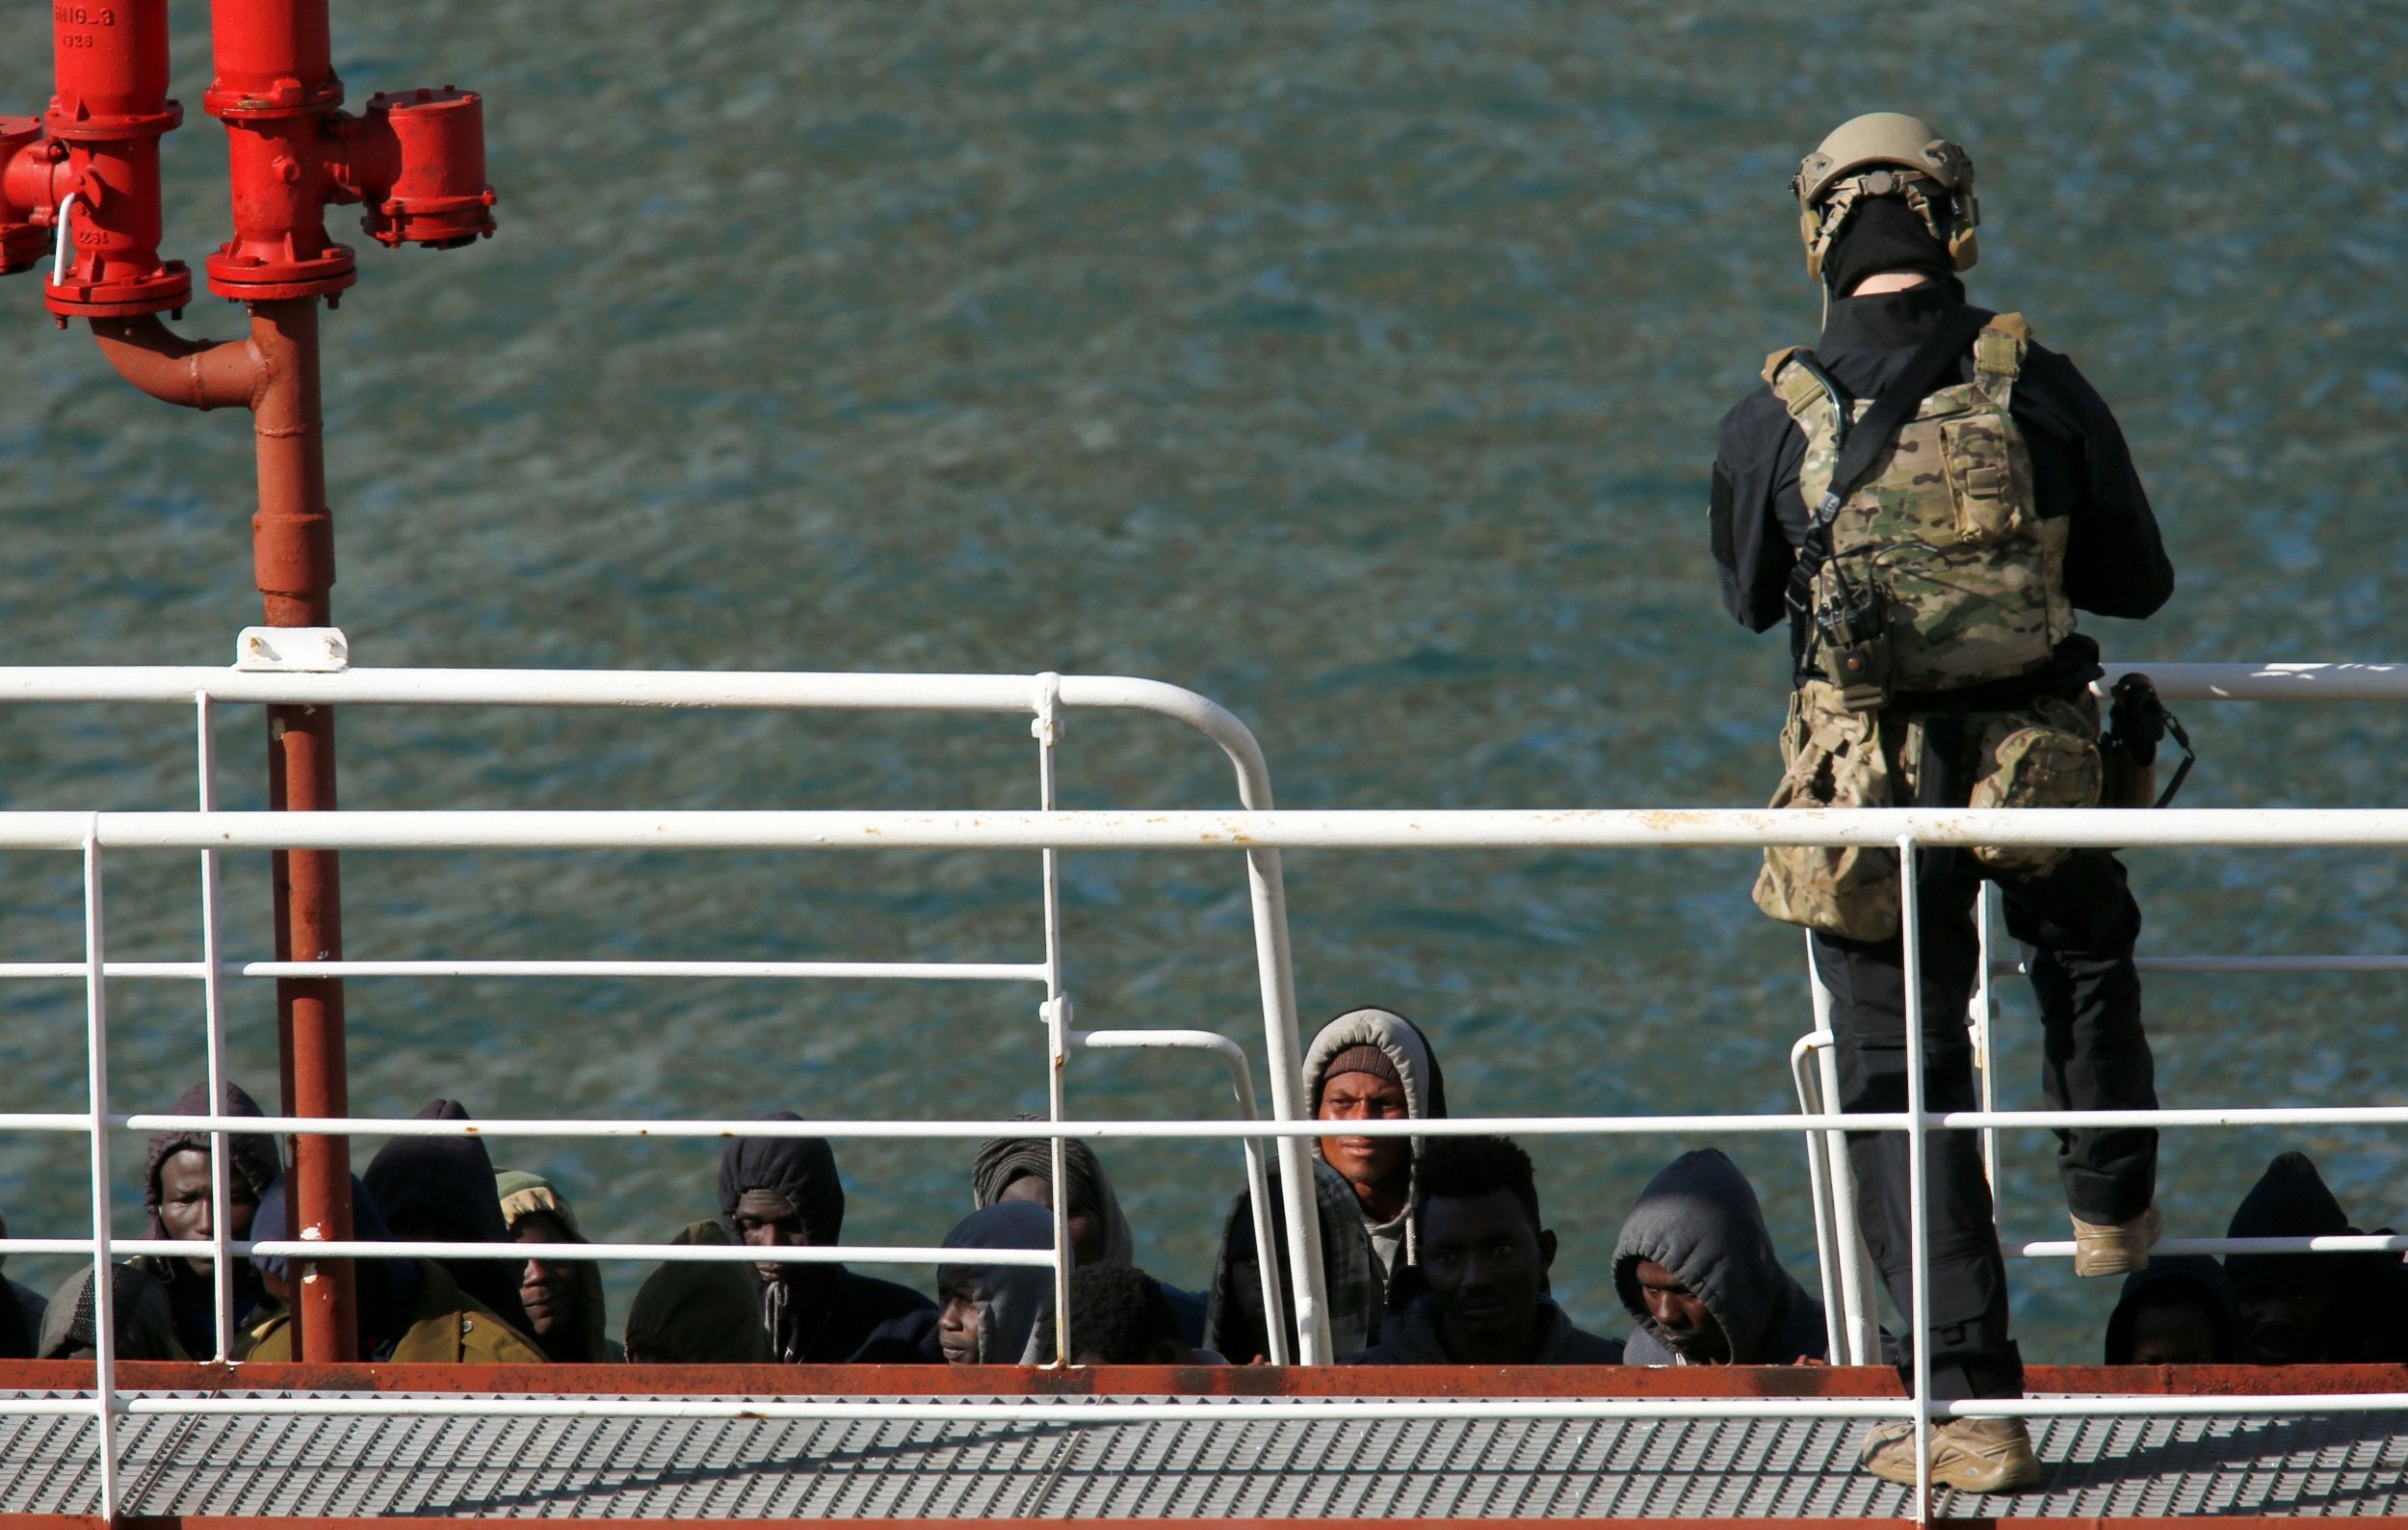 A Maltese special forces soldier guards a group of migrants on the merchant ship El Hiblu 1 after it was seized by authorities